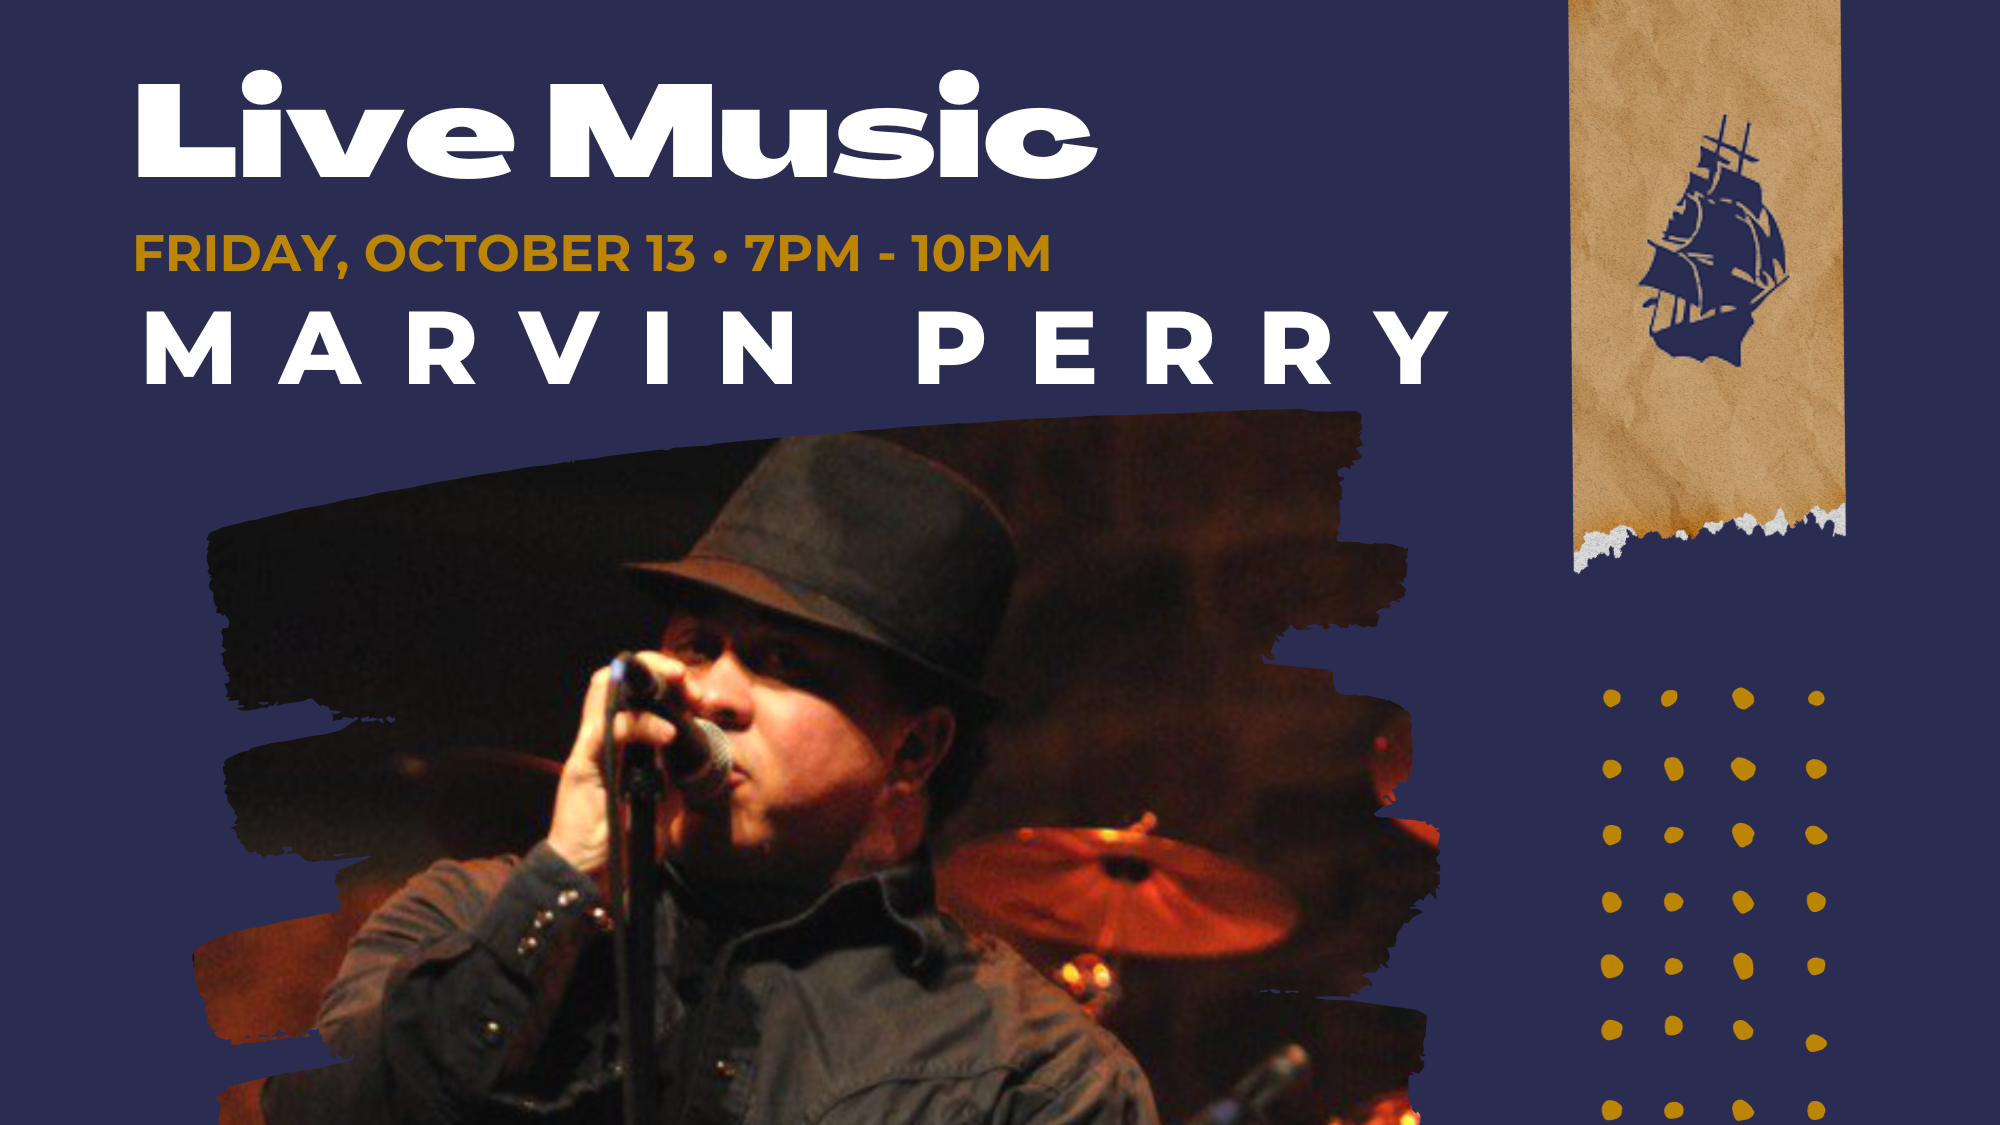 CCNB Marvin Perry Live Music 1013 tv graphic